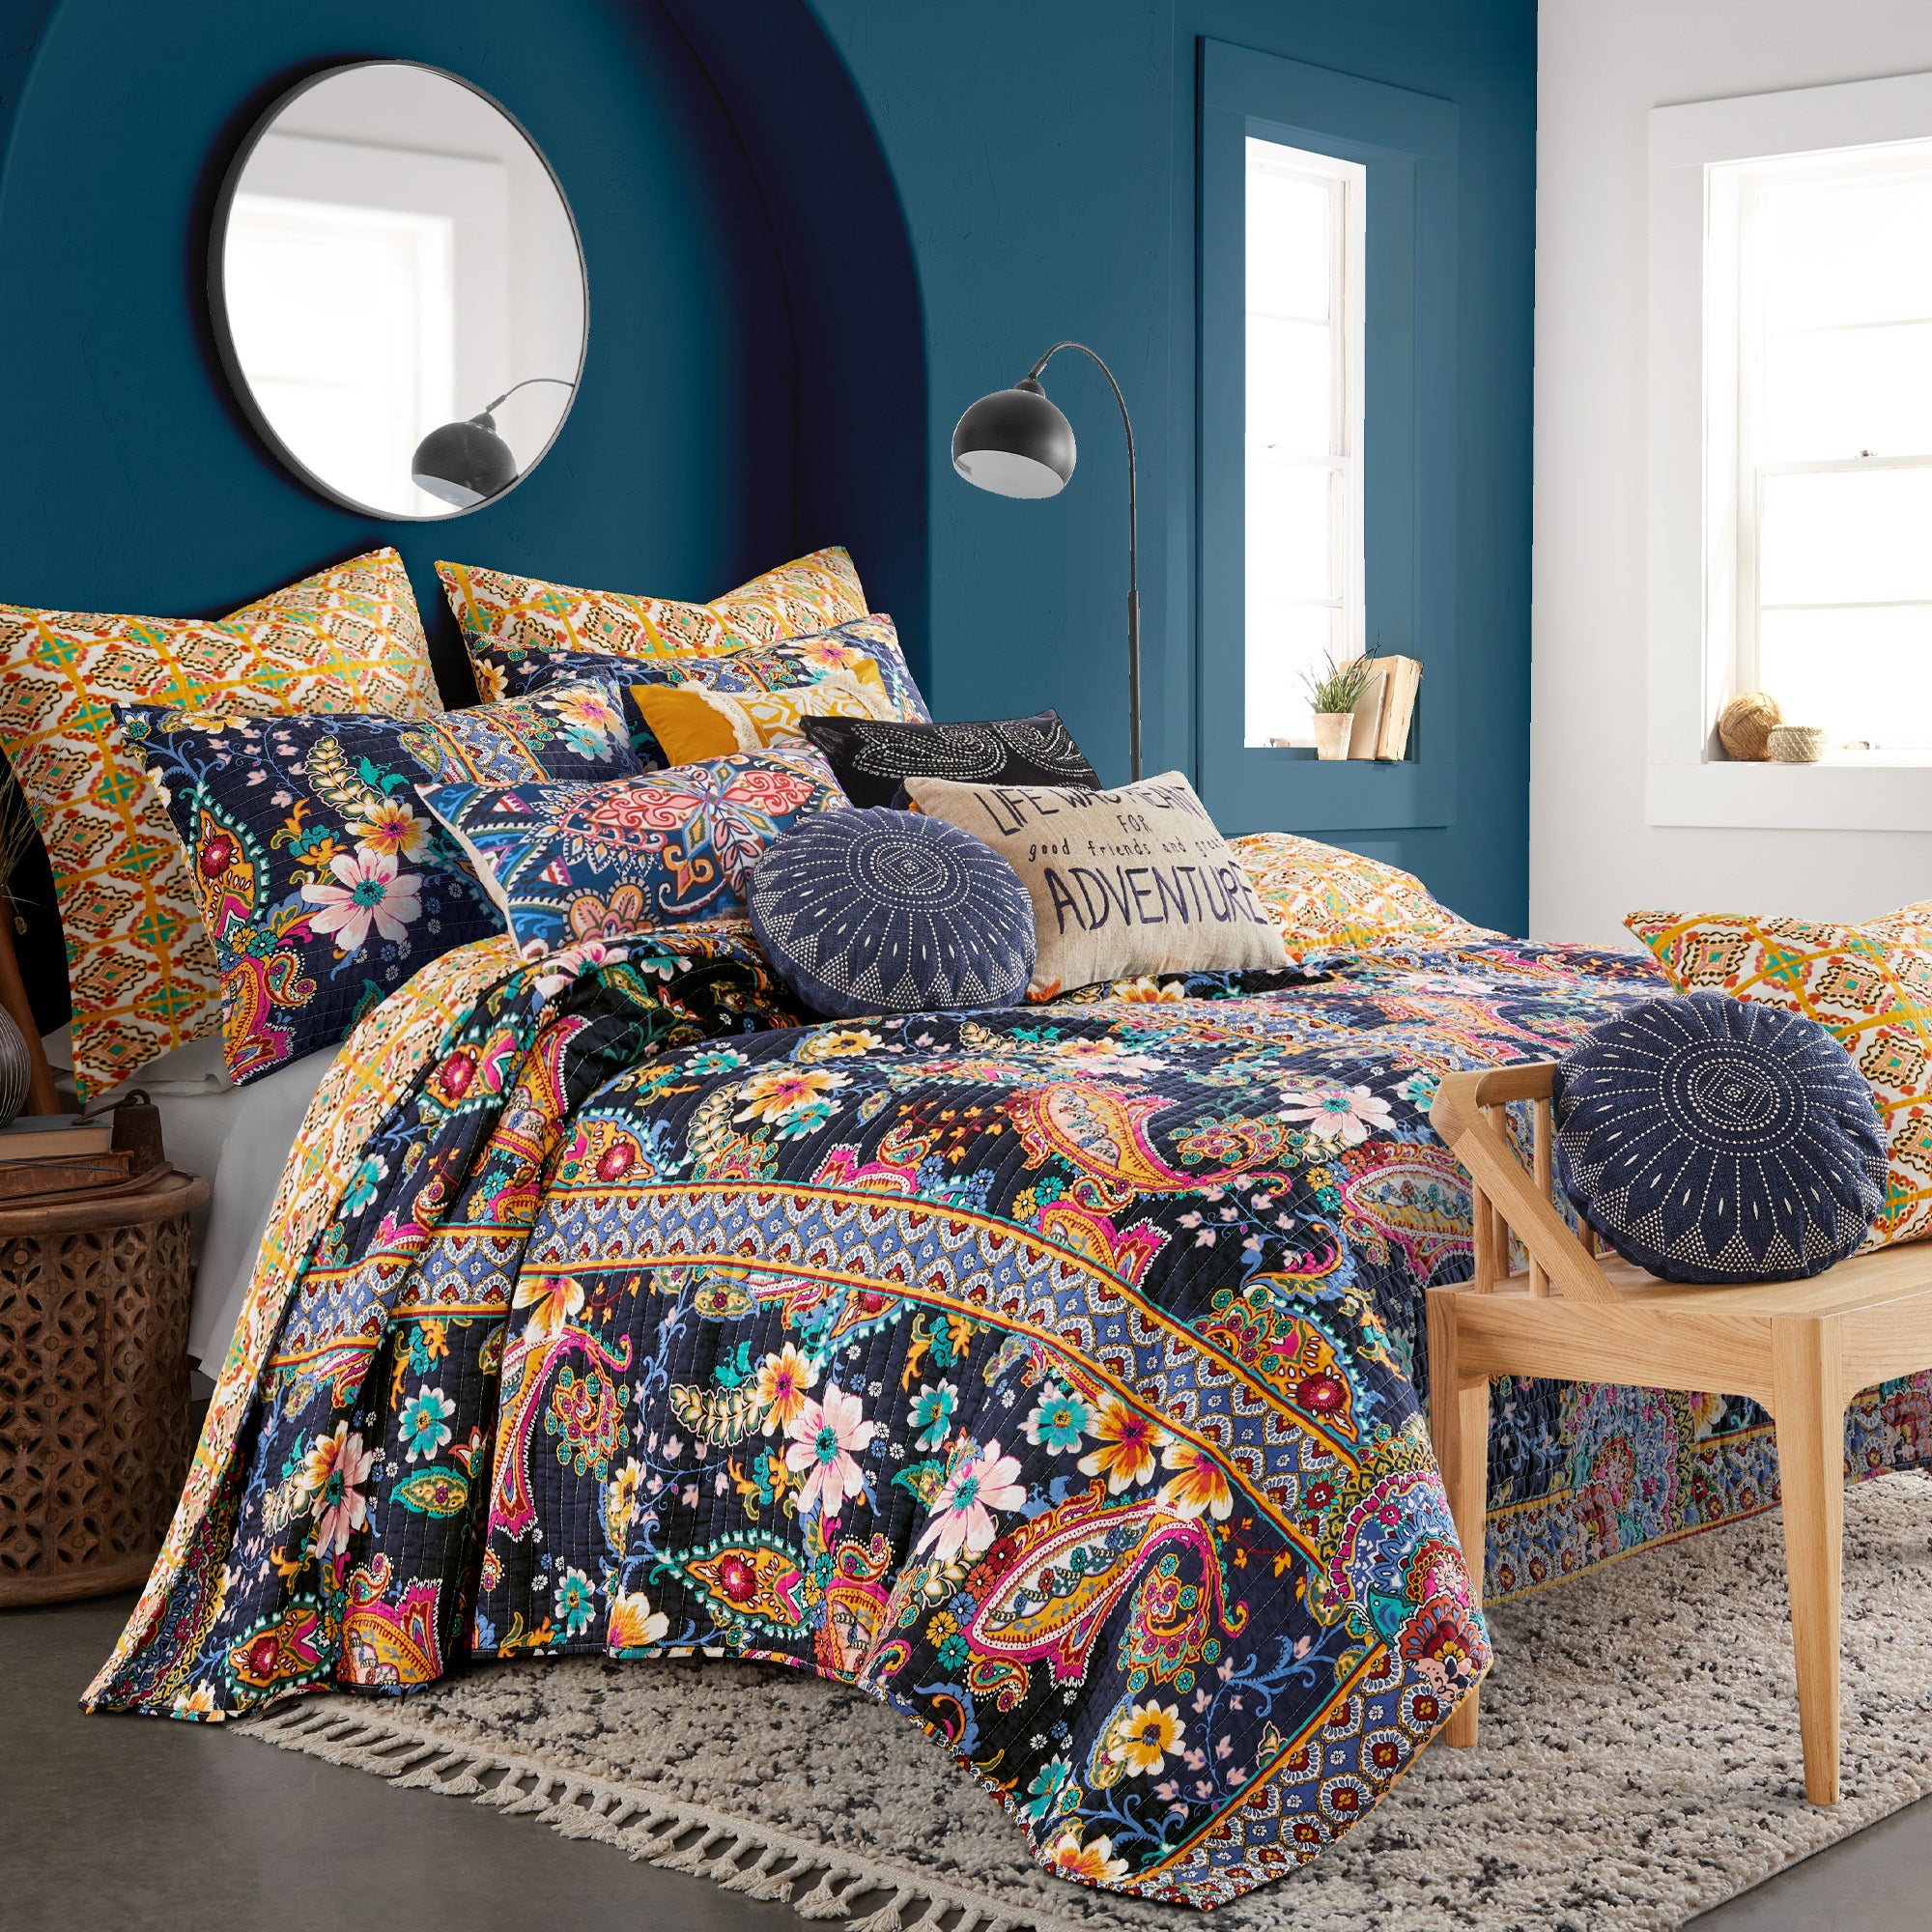 Levtex Home - Jules Quilt Set - Full/Queen Quilt 88x92in. + Two Standard  Pillow Shams (26x20in.) - Bohemian - Teal, Orange, Yellow, Green, Blue,  Red